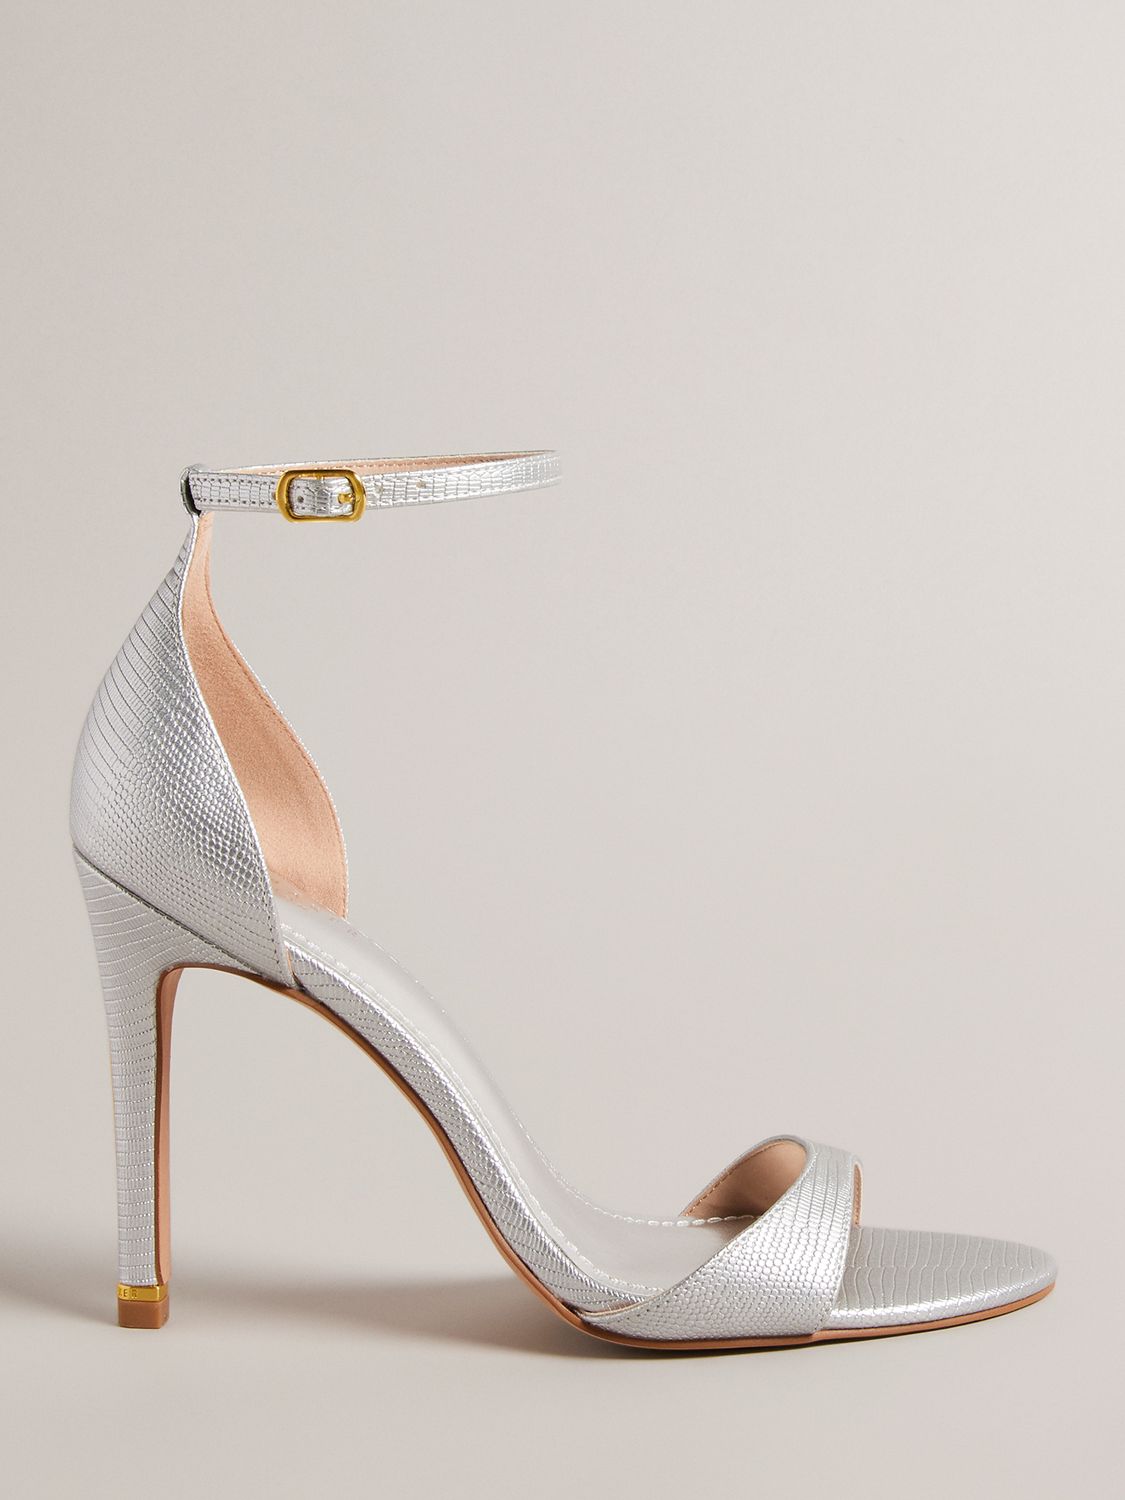 Ted Baker Helmiam Ankle Strap Heeled Sandals, Silver at John Lewis ...